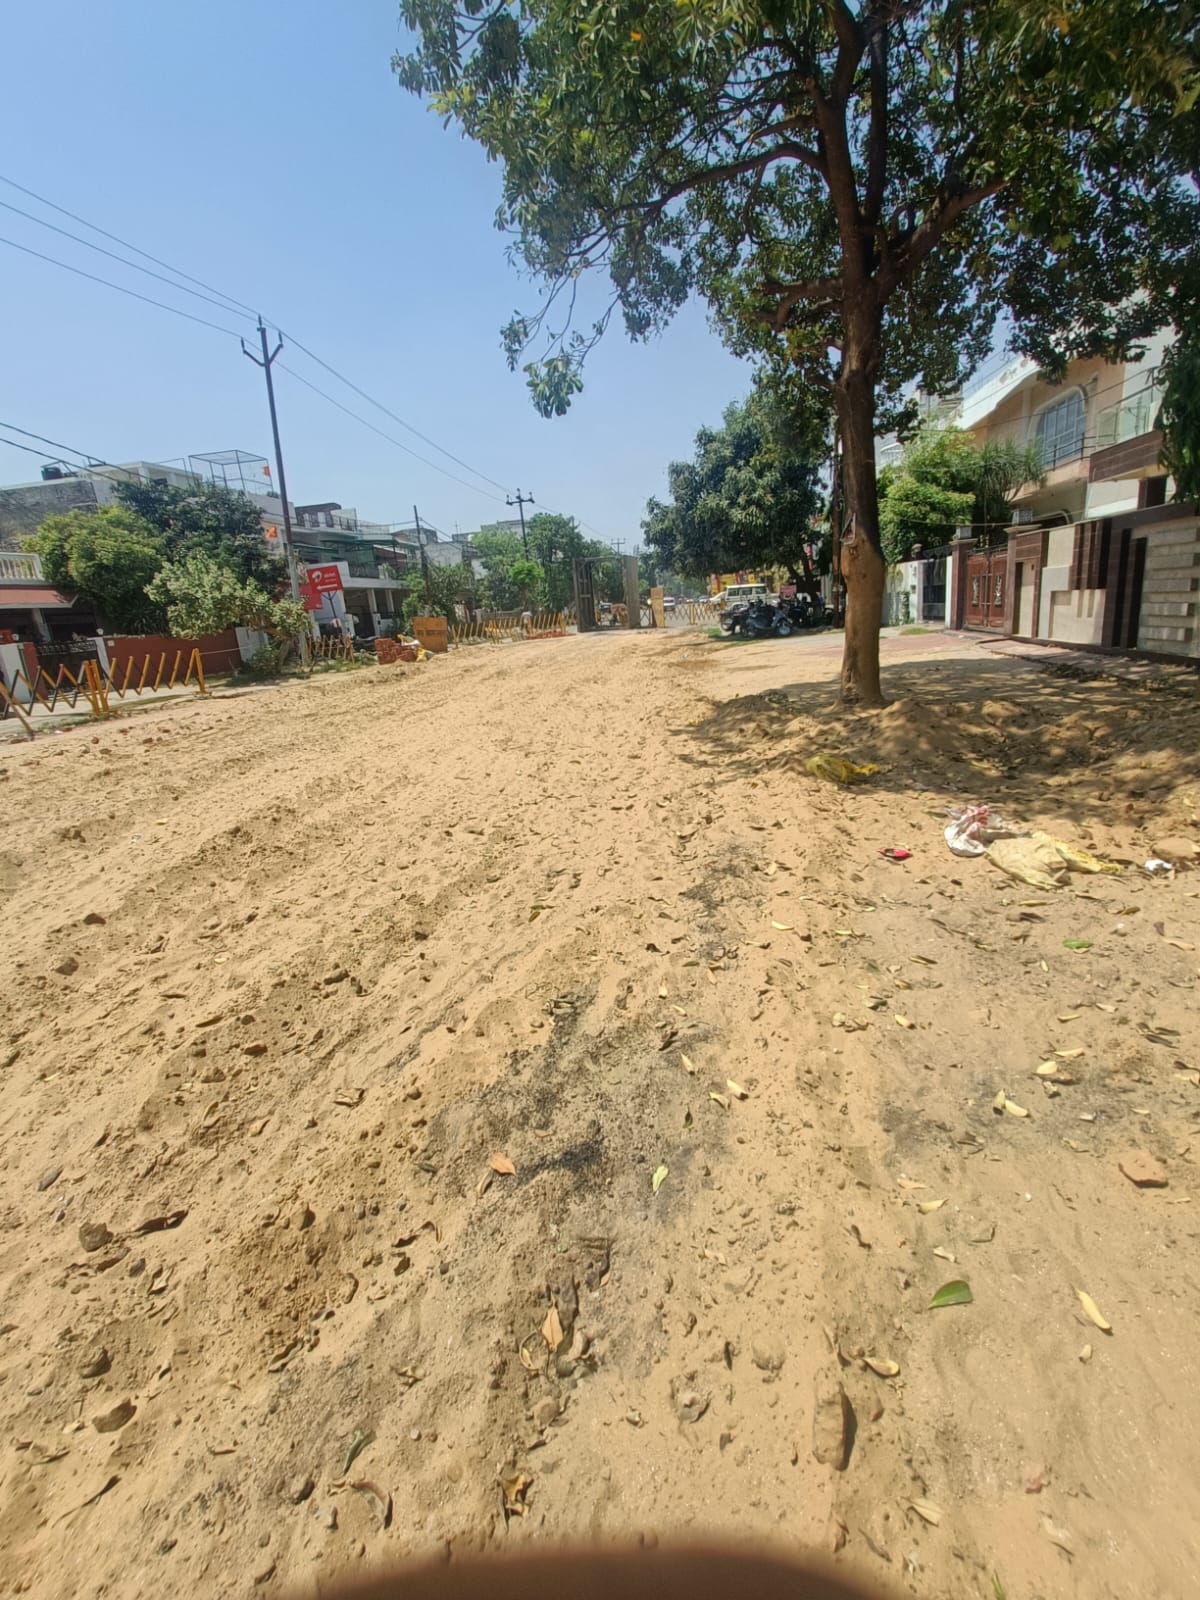 Suez India completes laying of sewer line of Vikas Nagar under One City One Operator initiative after road collapse